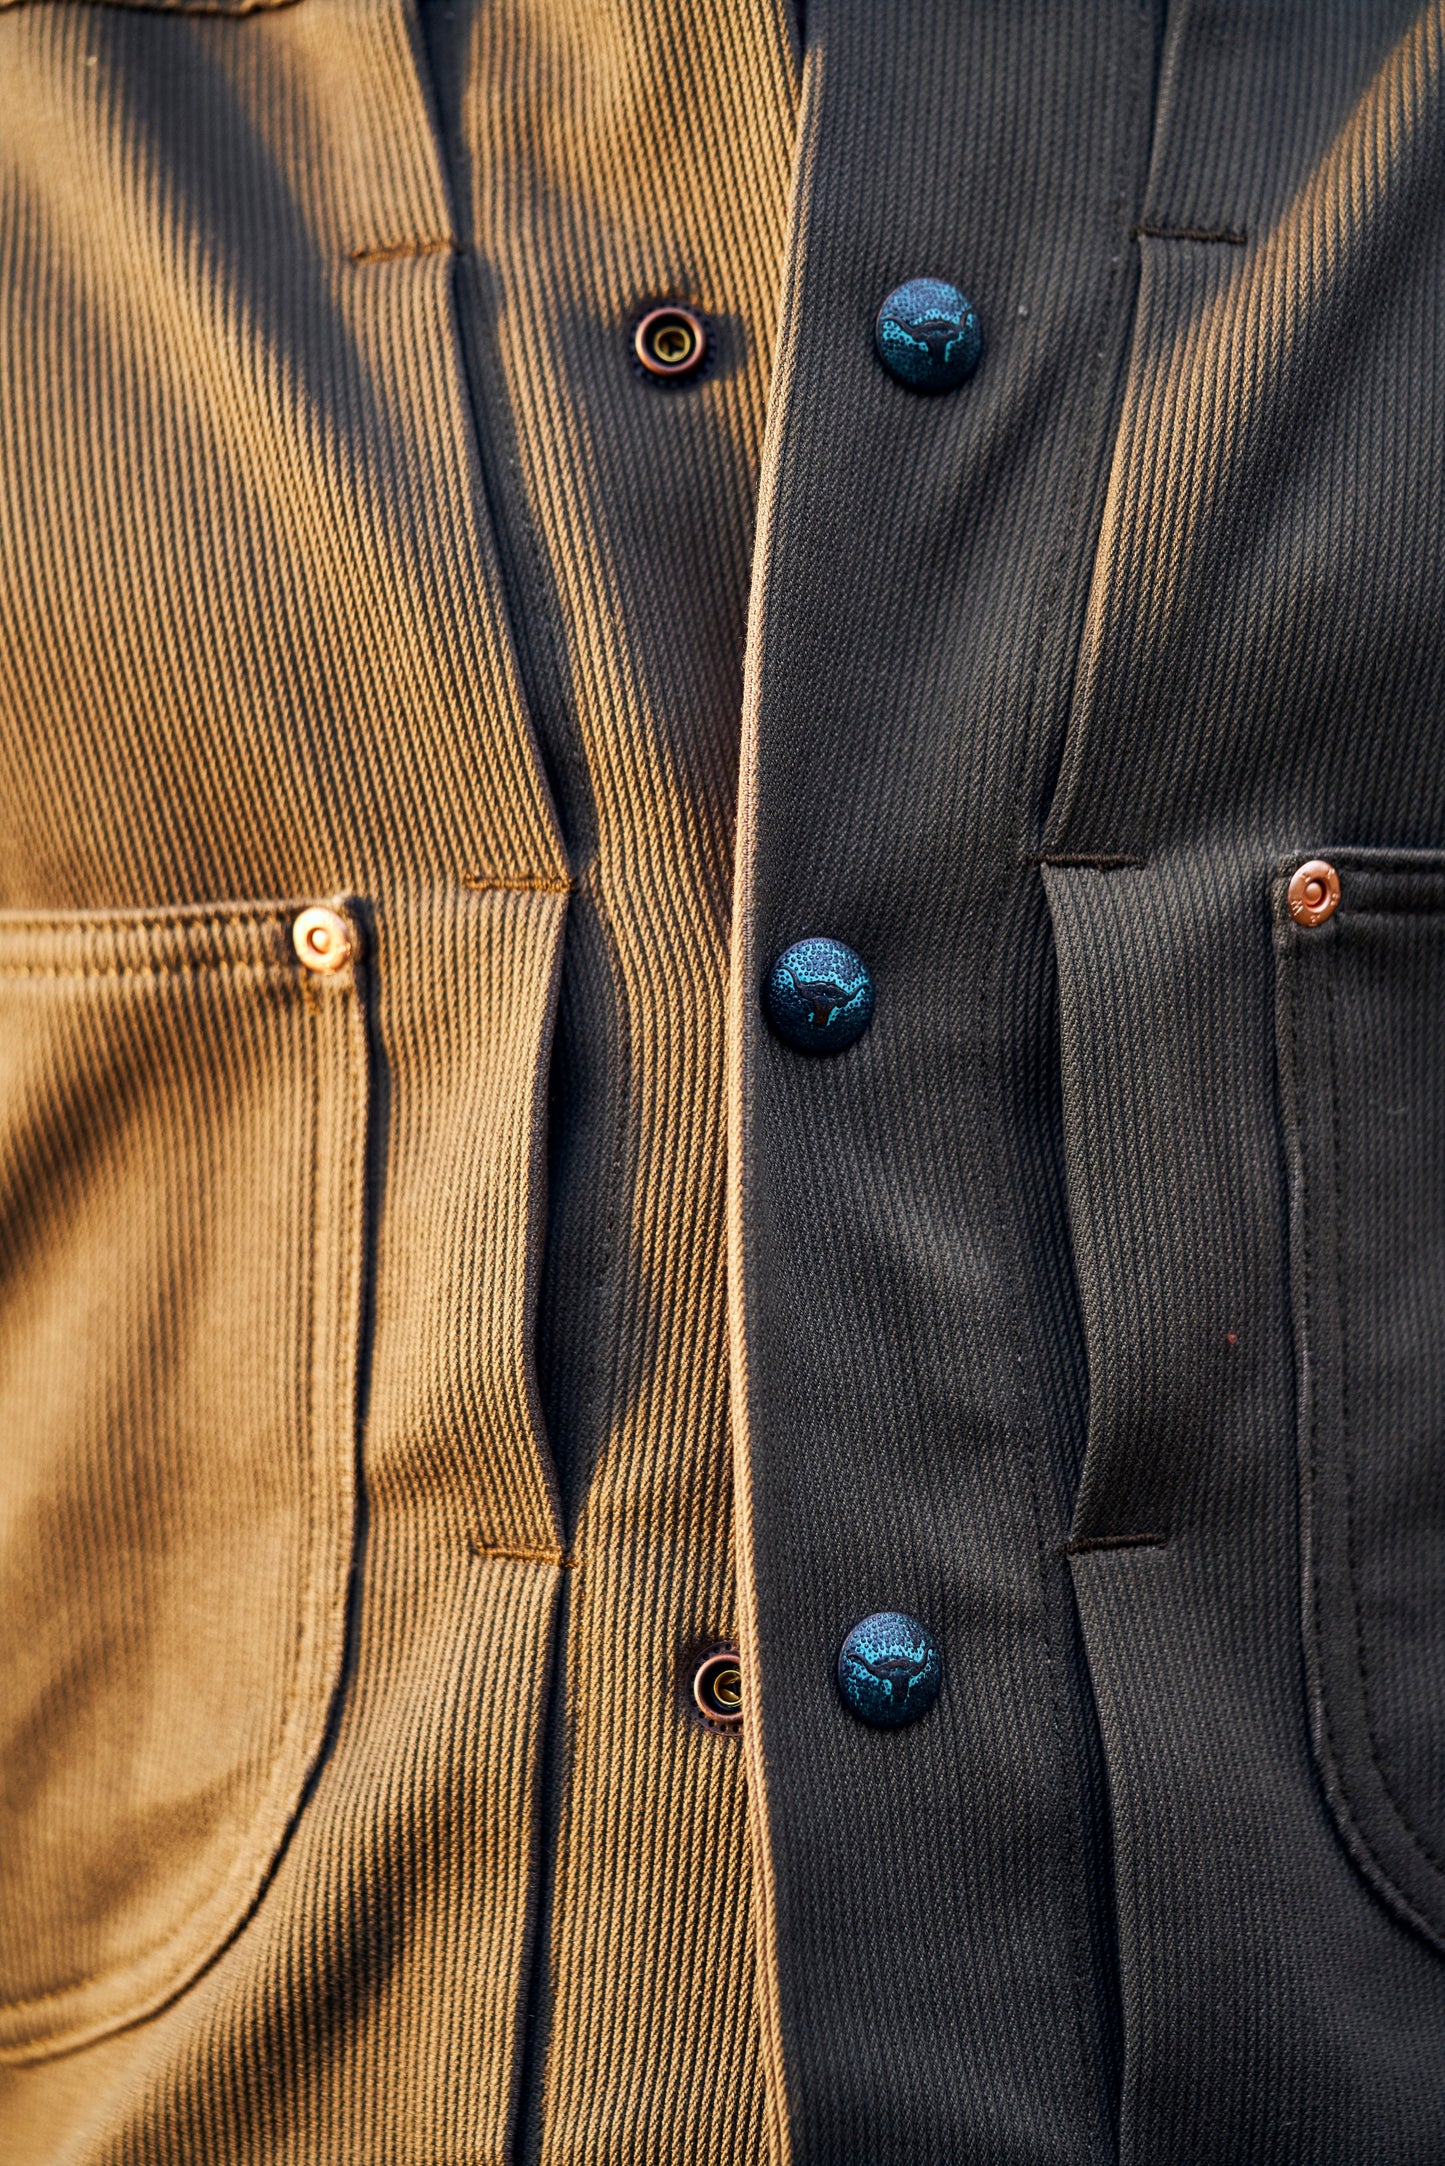 Faded Olive Bedford Cord Ranch Jacket